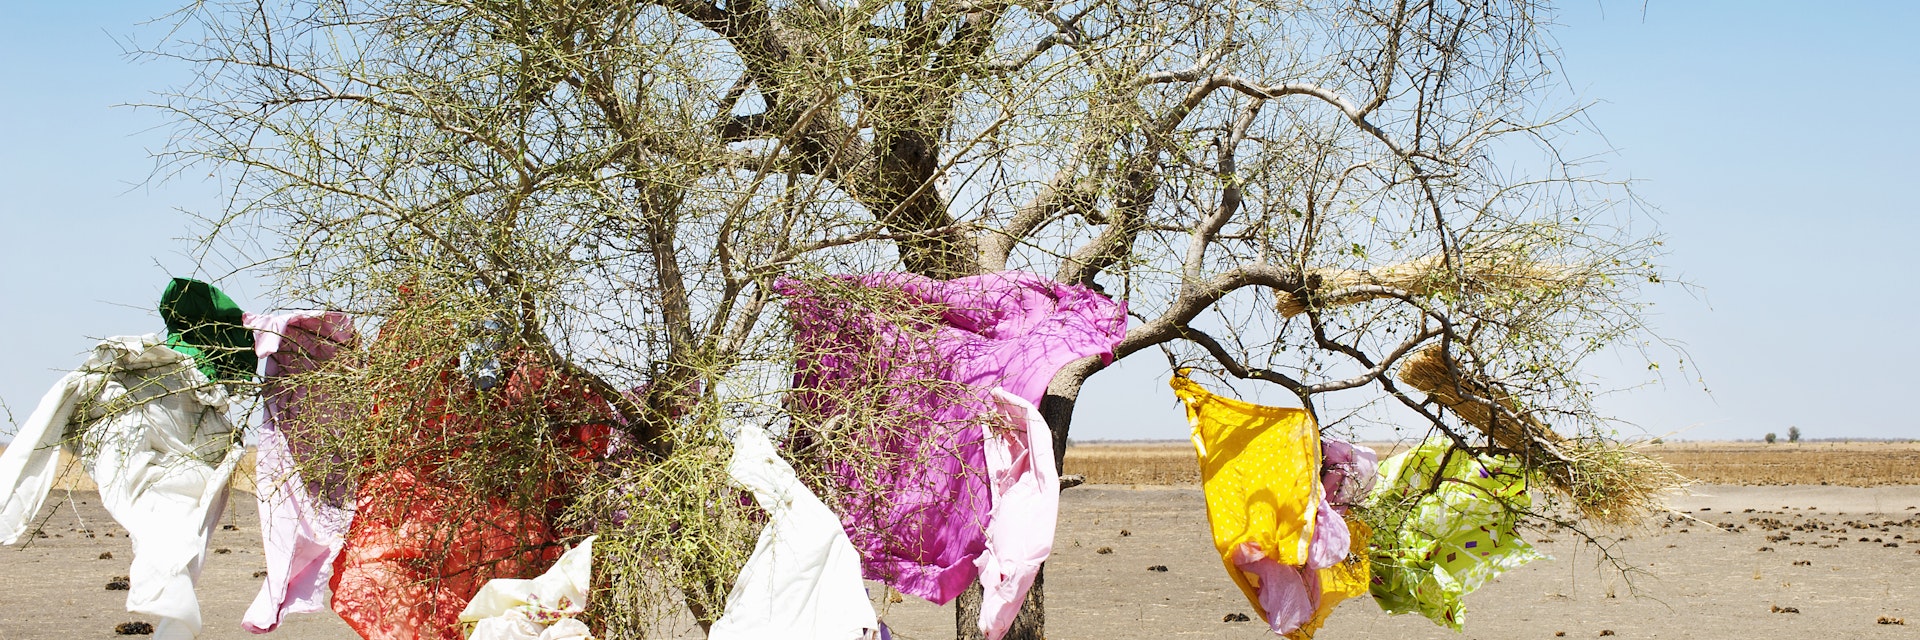 Colorful clothes hang on a tree. South Sudan.